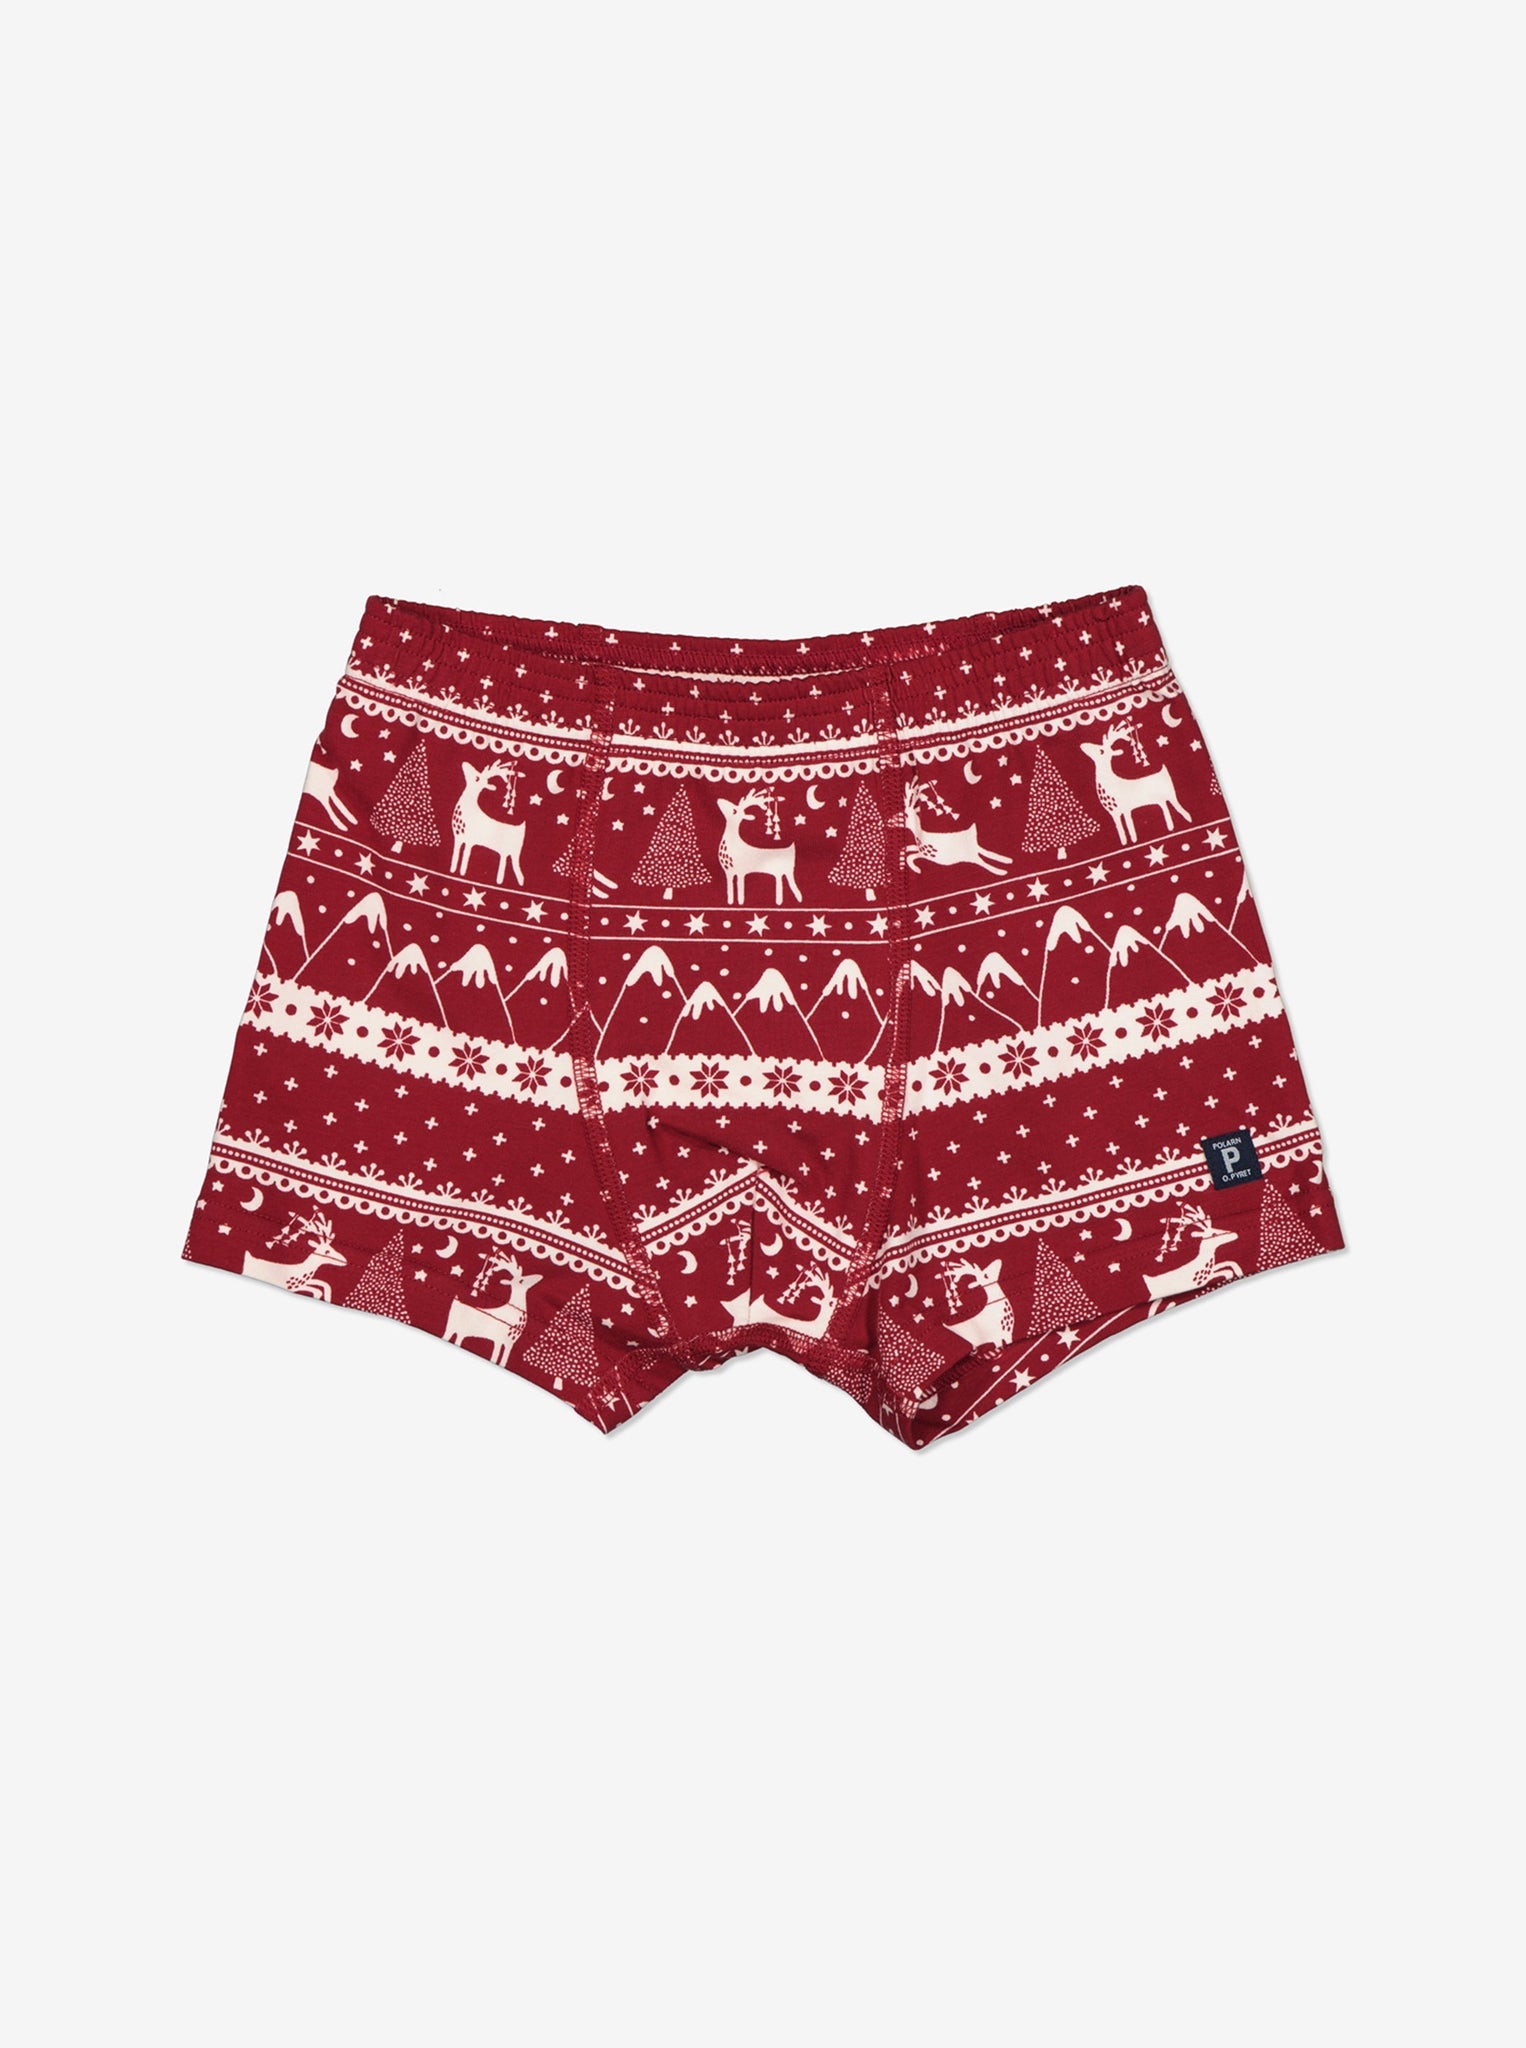 Christmas Organic Cotton Boys Boxers from the Polarn O. Pyret kidswear collection. Ethically produced kids clothing.